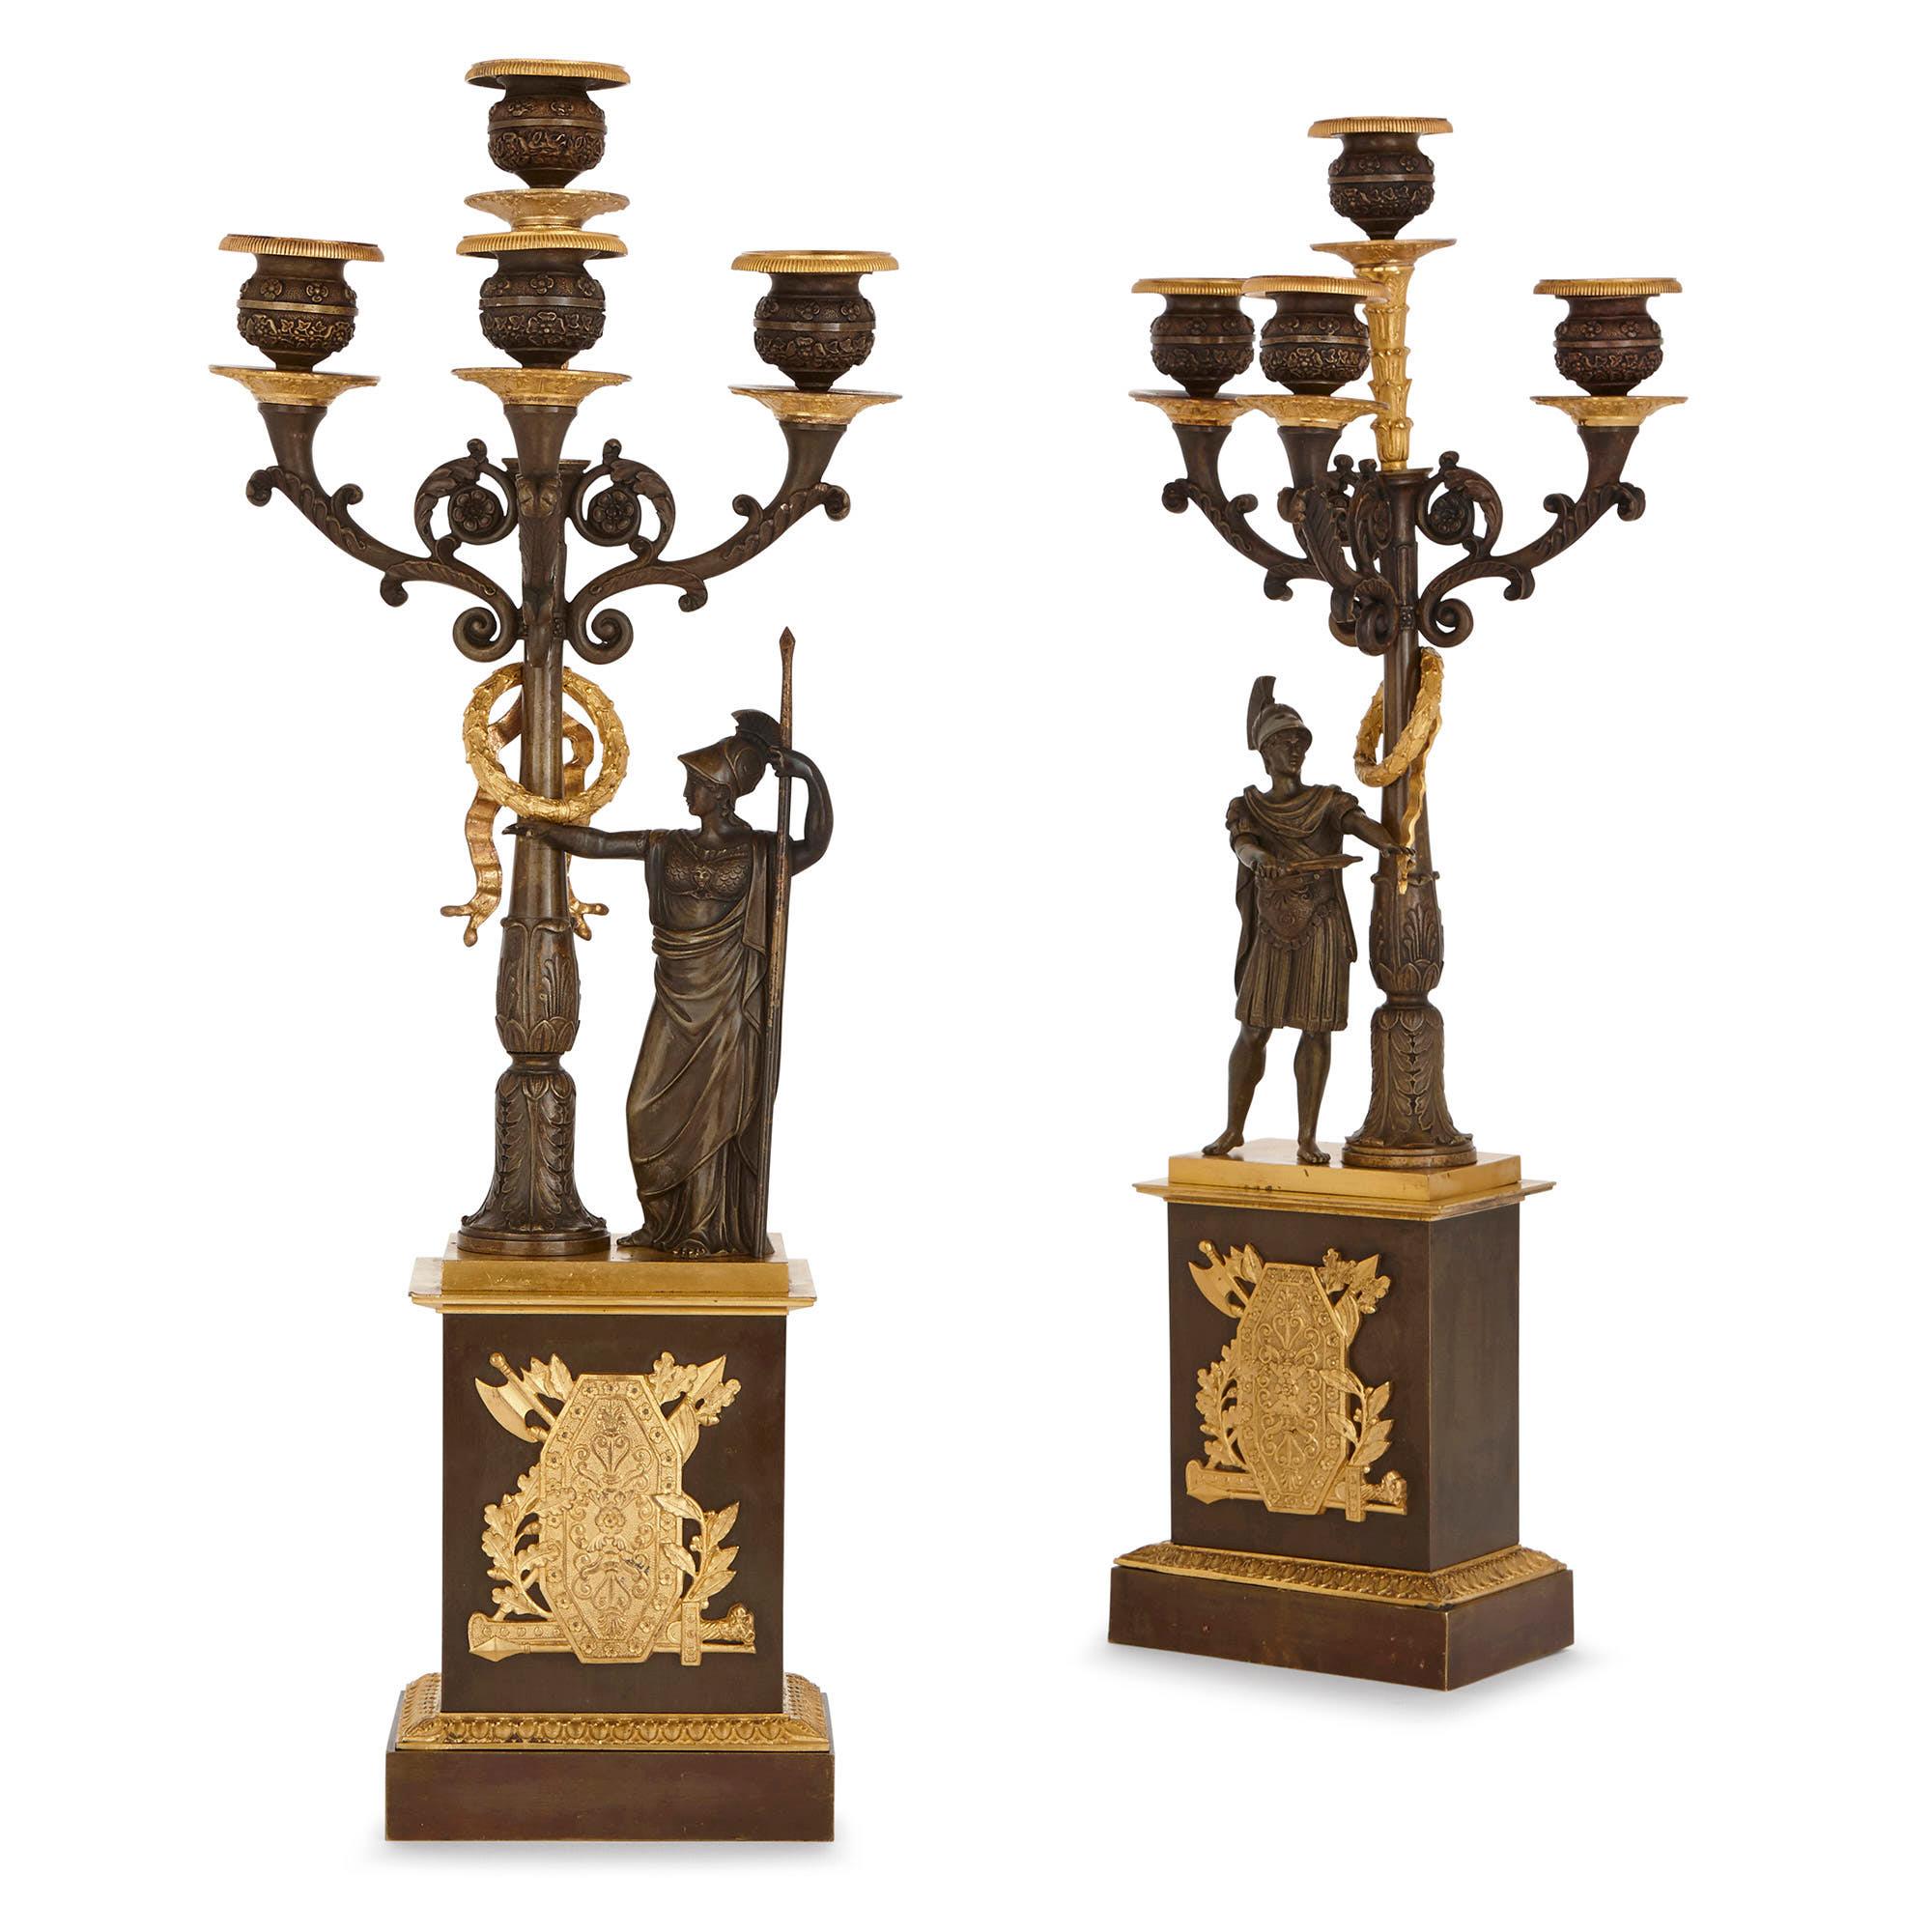 This majestic pair of gilt and patinated bronze candelabra are designed in the Empire style, which was popularized under Napoleon I (1769-1821). The art of the Empire period (1804-1814, 1815), when Napoleon was in power, often focused on the